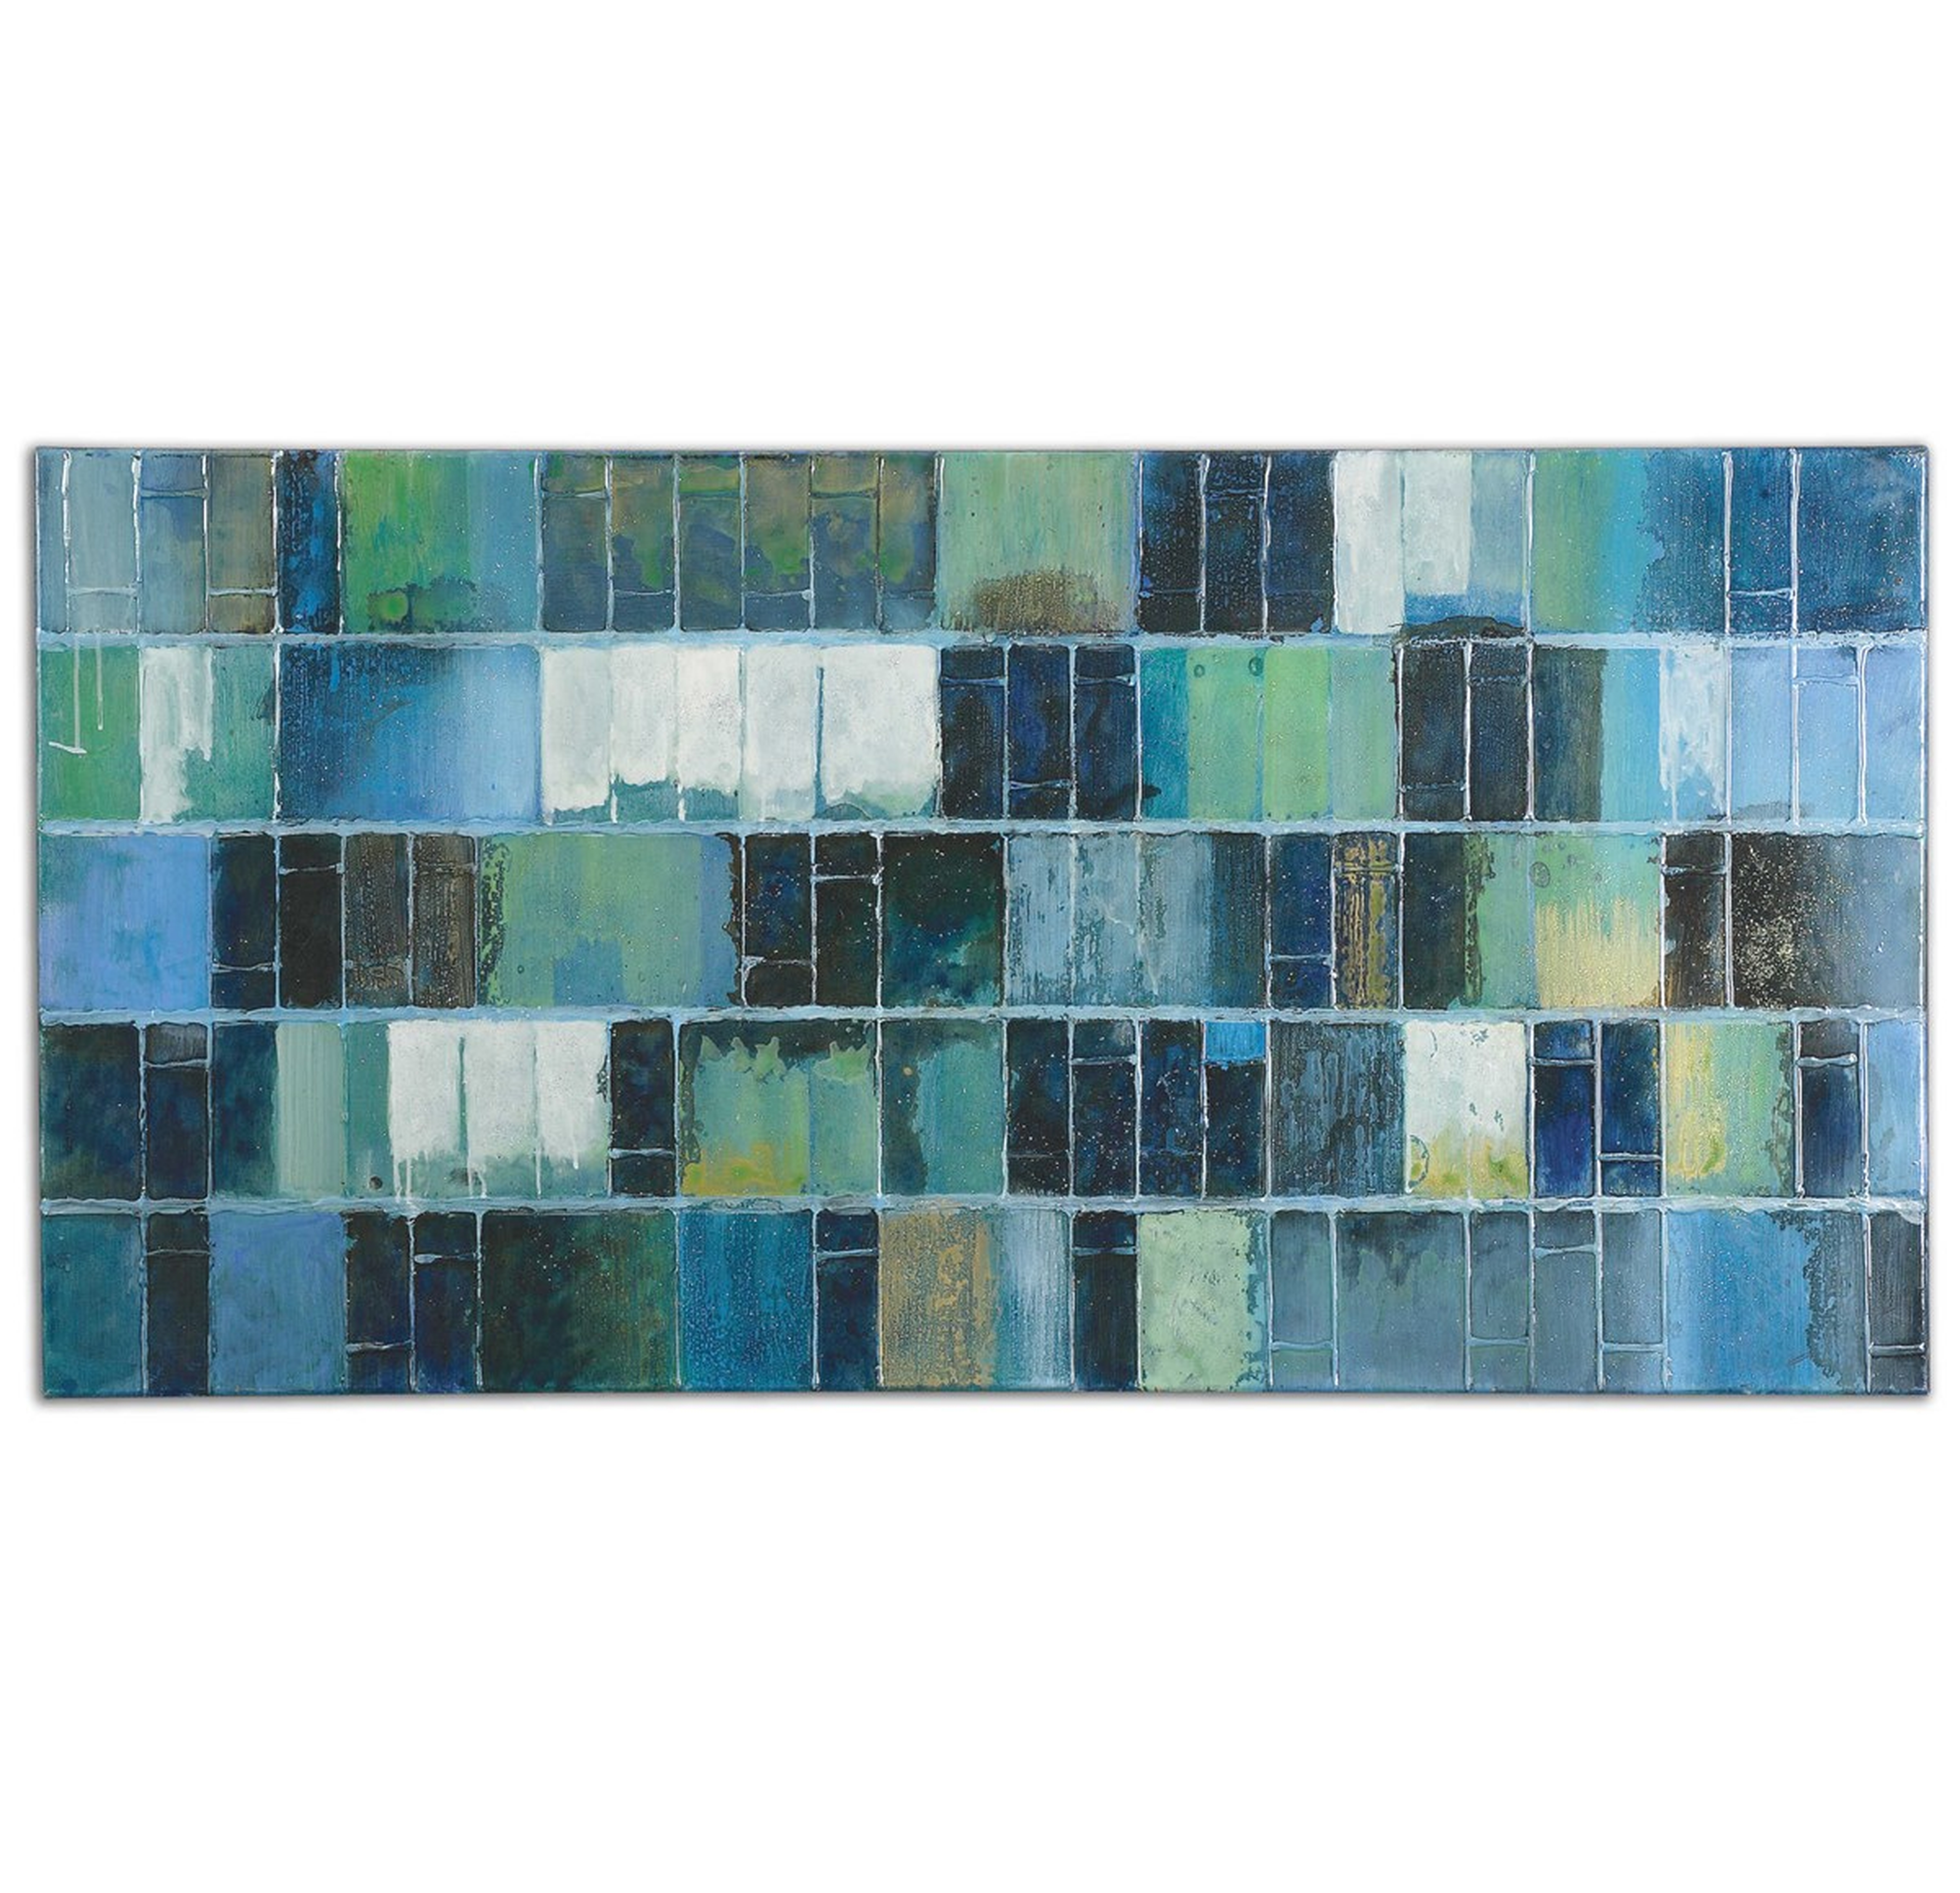 GLASS TILES HAND PAINTED CANVAS - Hudsonhill Foundry